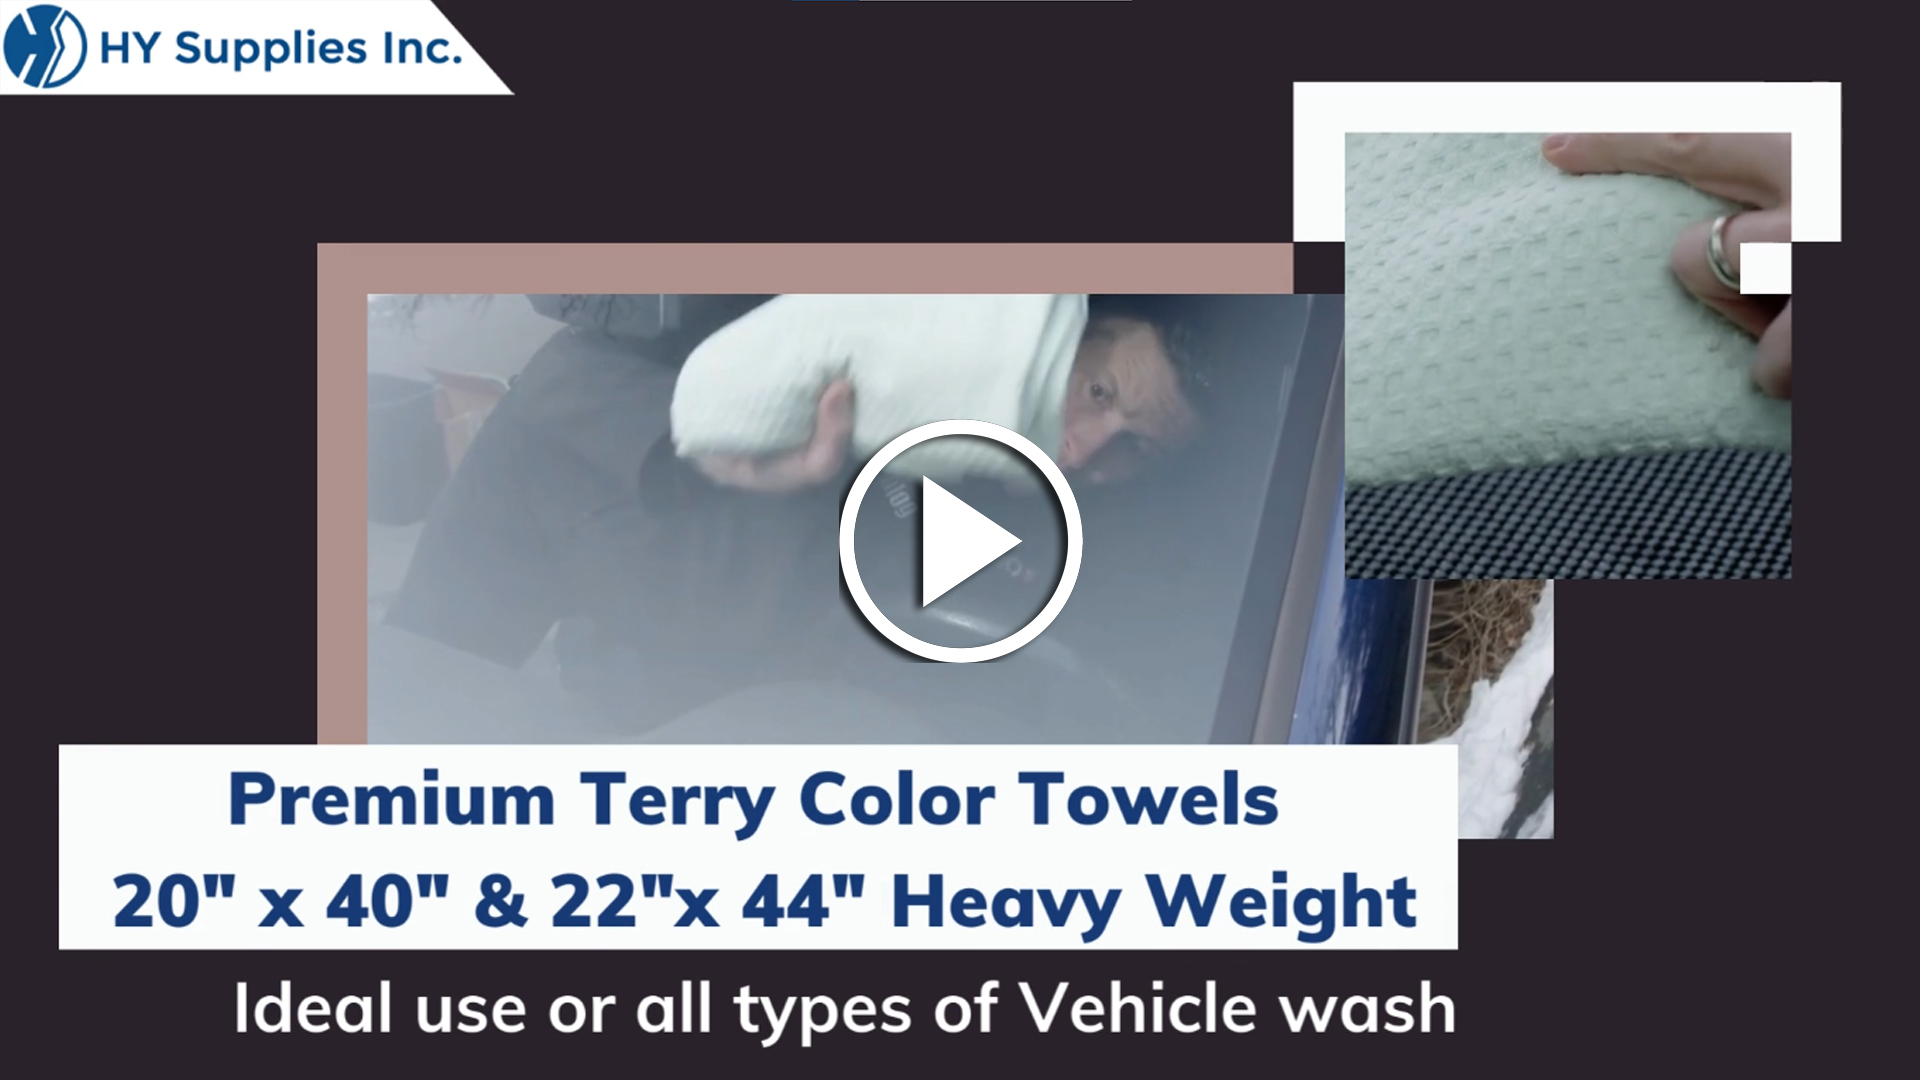 Premium Terry Color Towels - 20" x 40" & 22"x 44" Heavy Weight